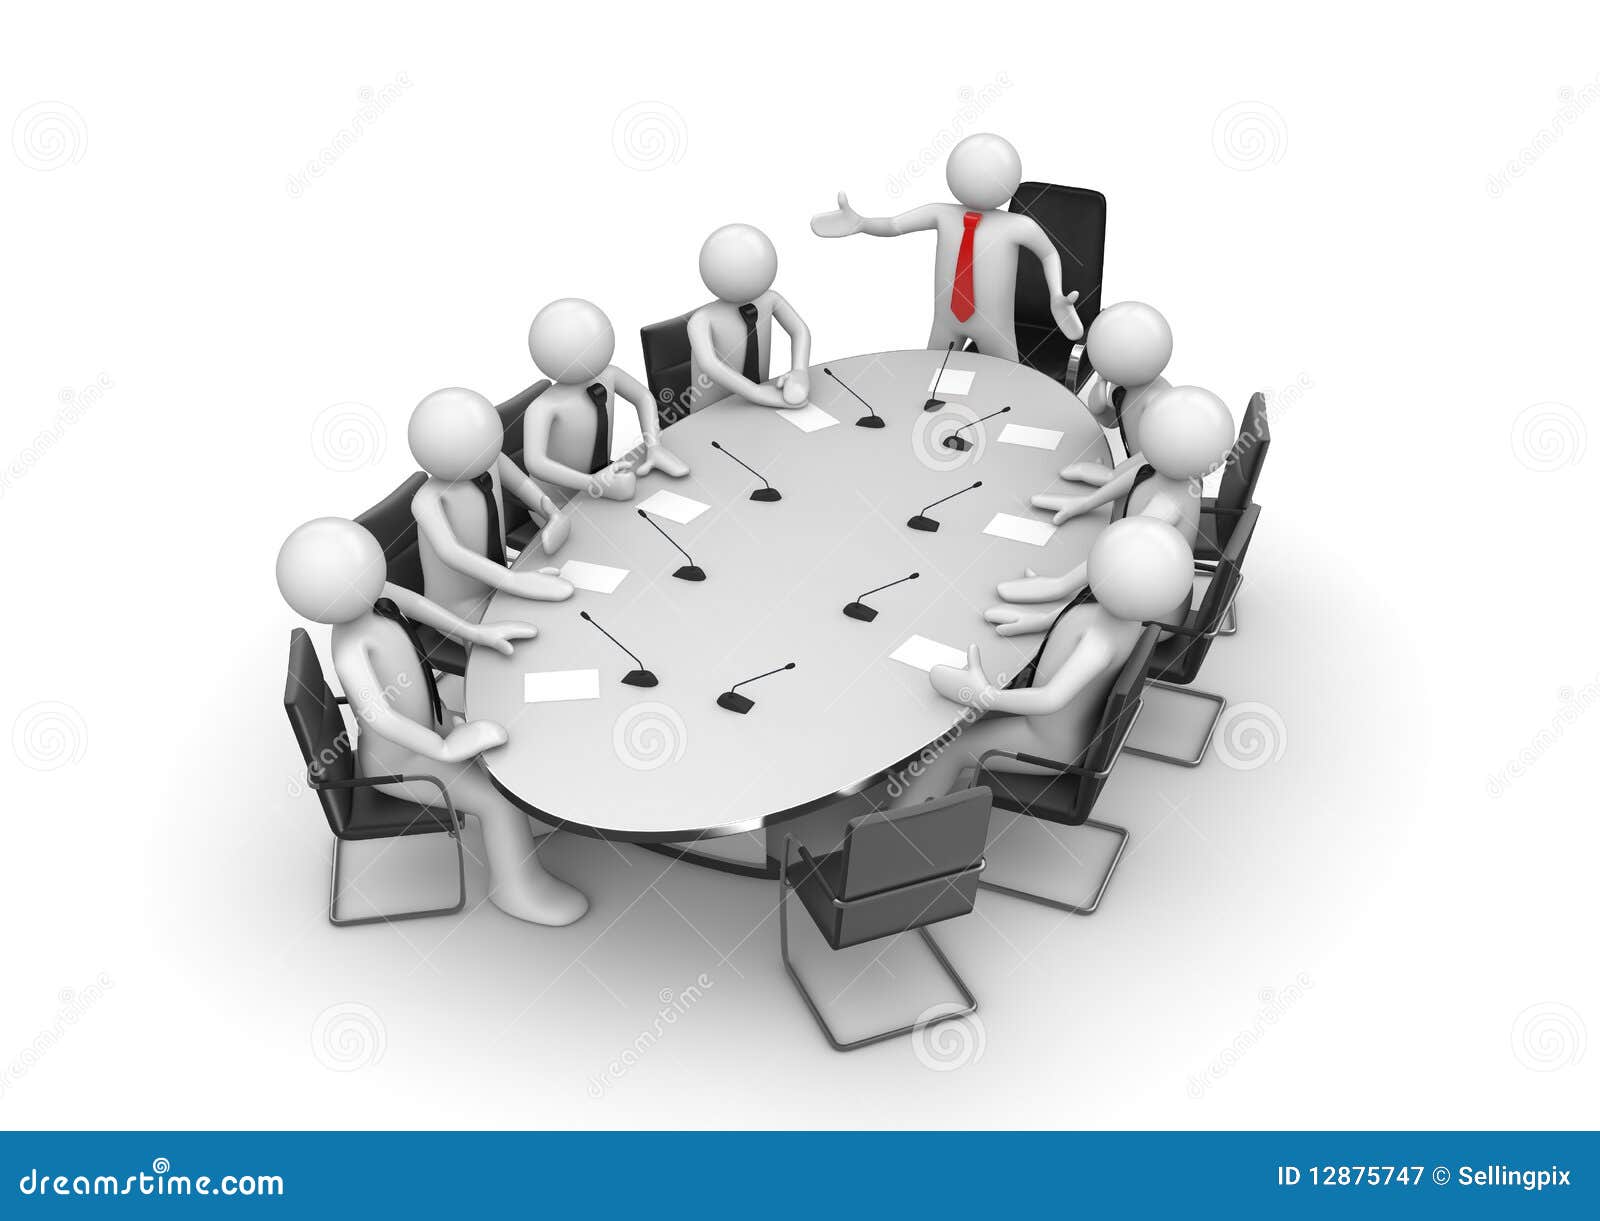 conference room clipart - photo #9